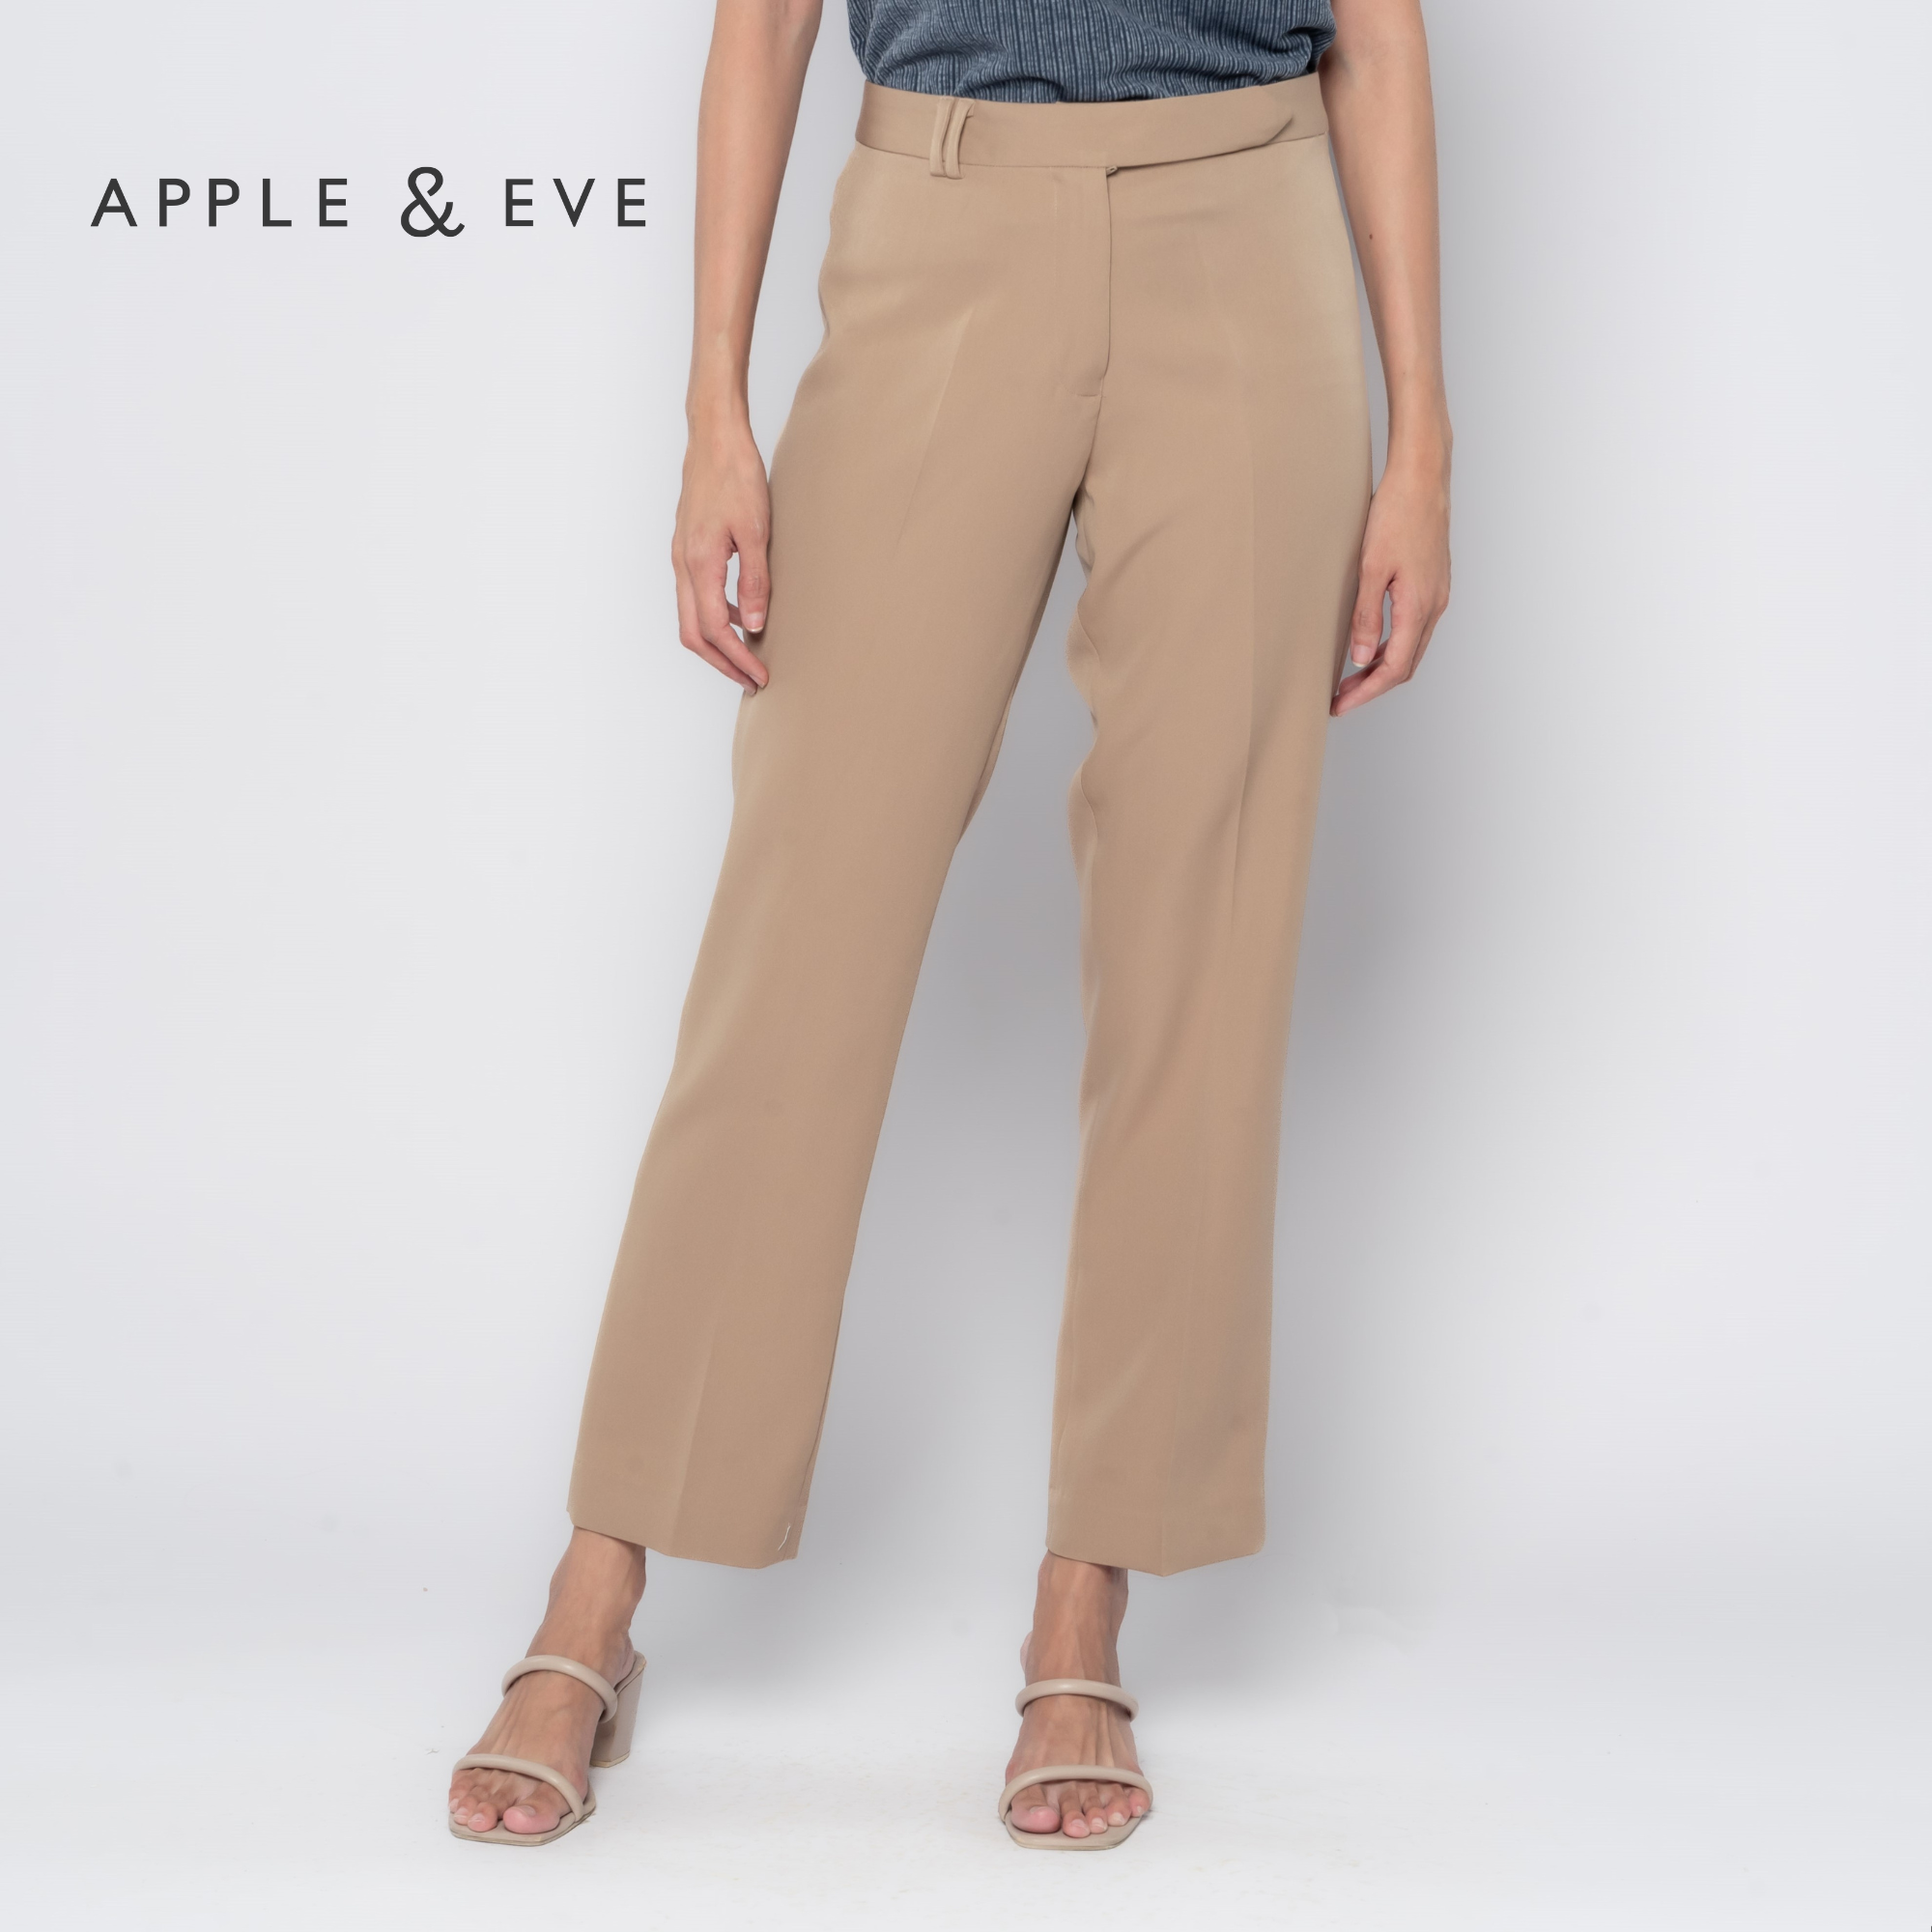 Apple & Eve Casual Capri Pants with Pleated Tab Detail